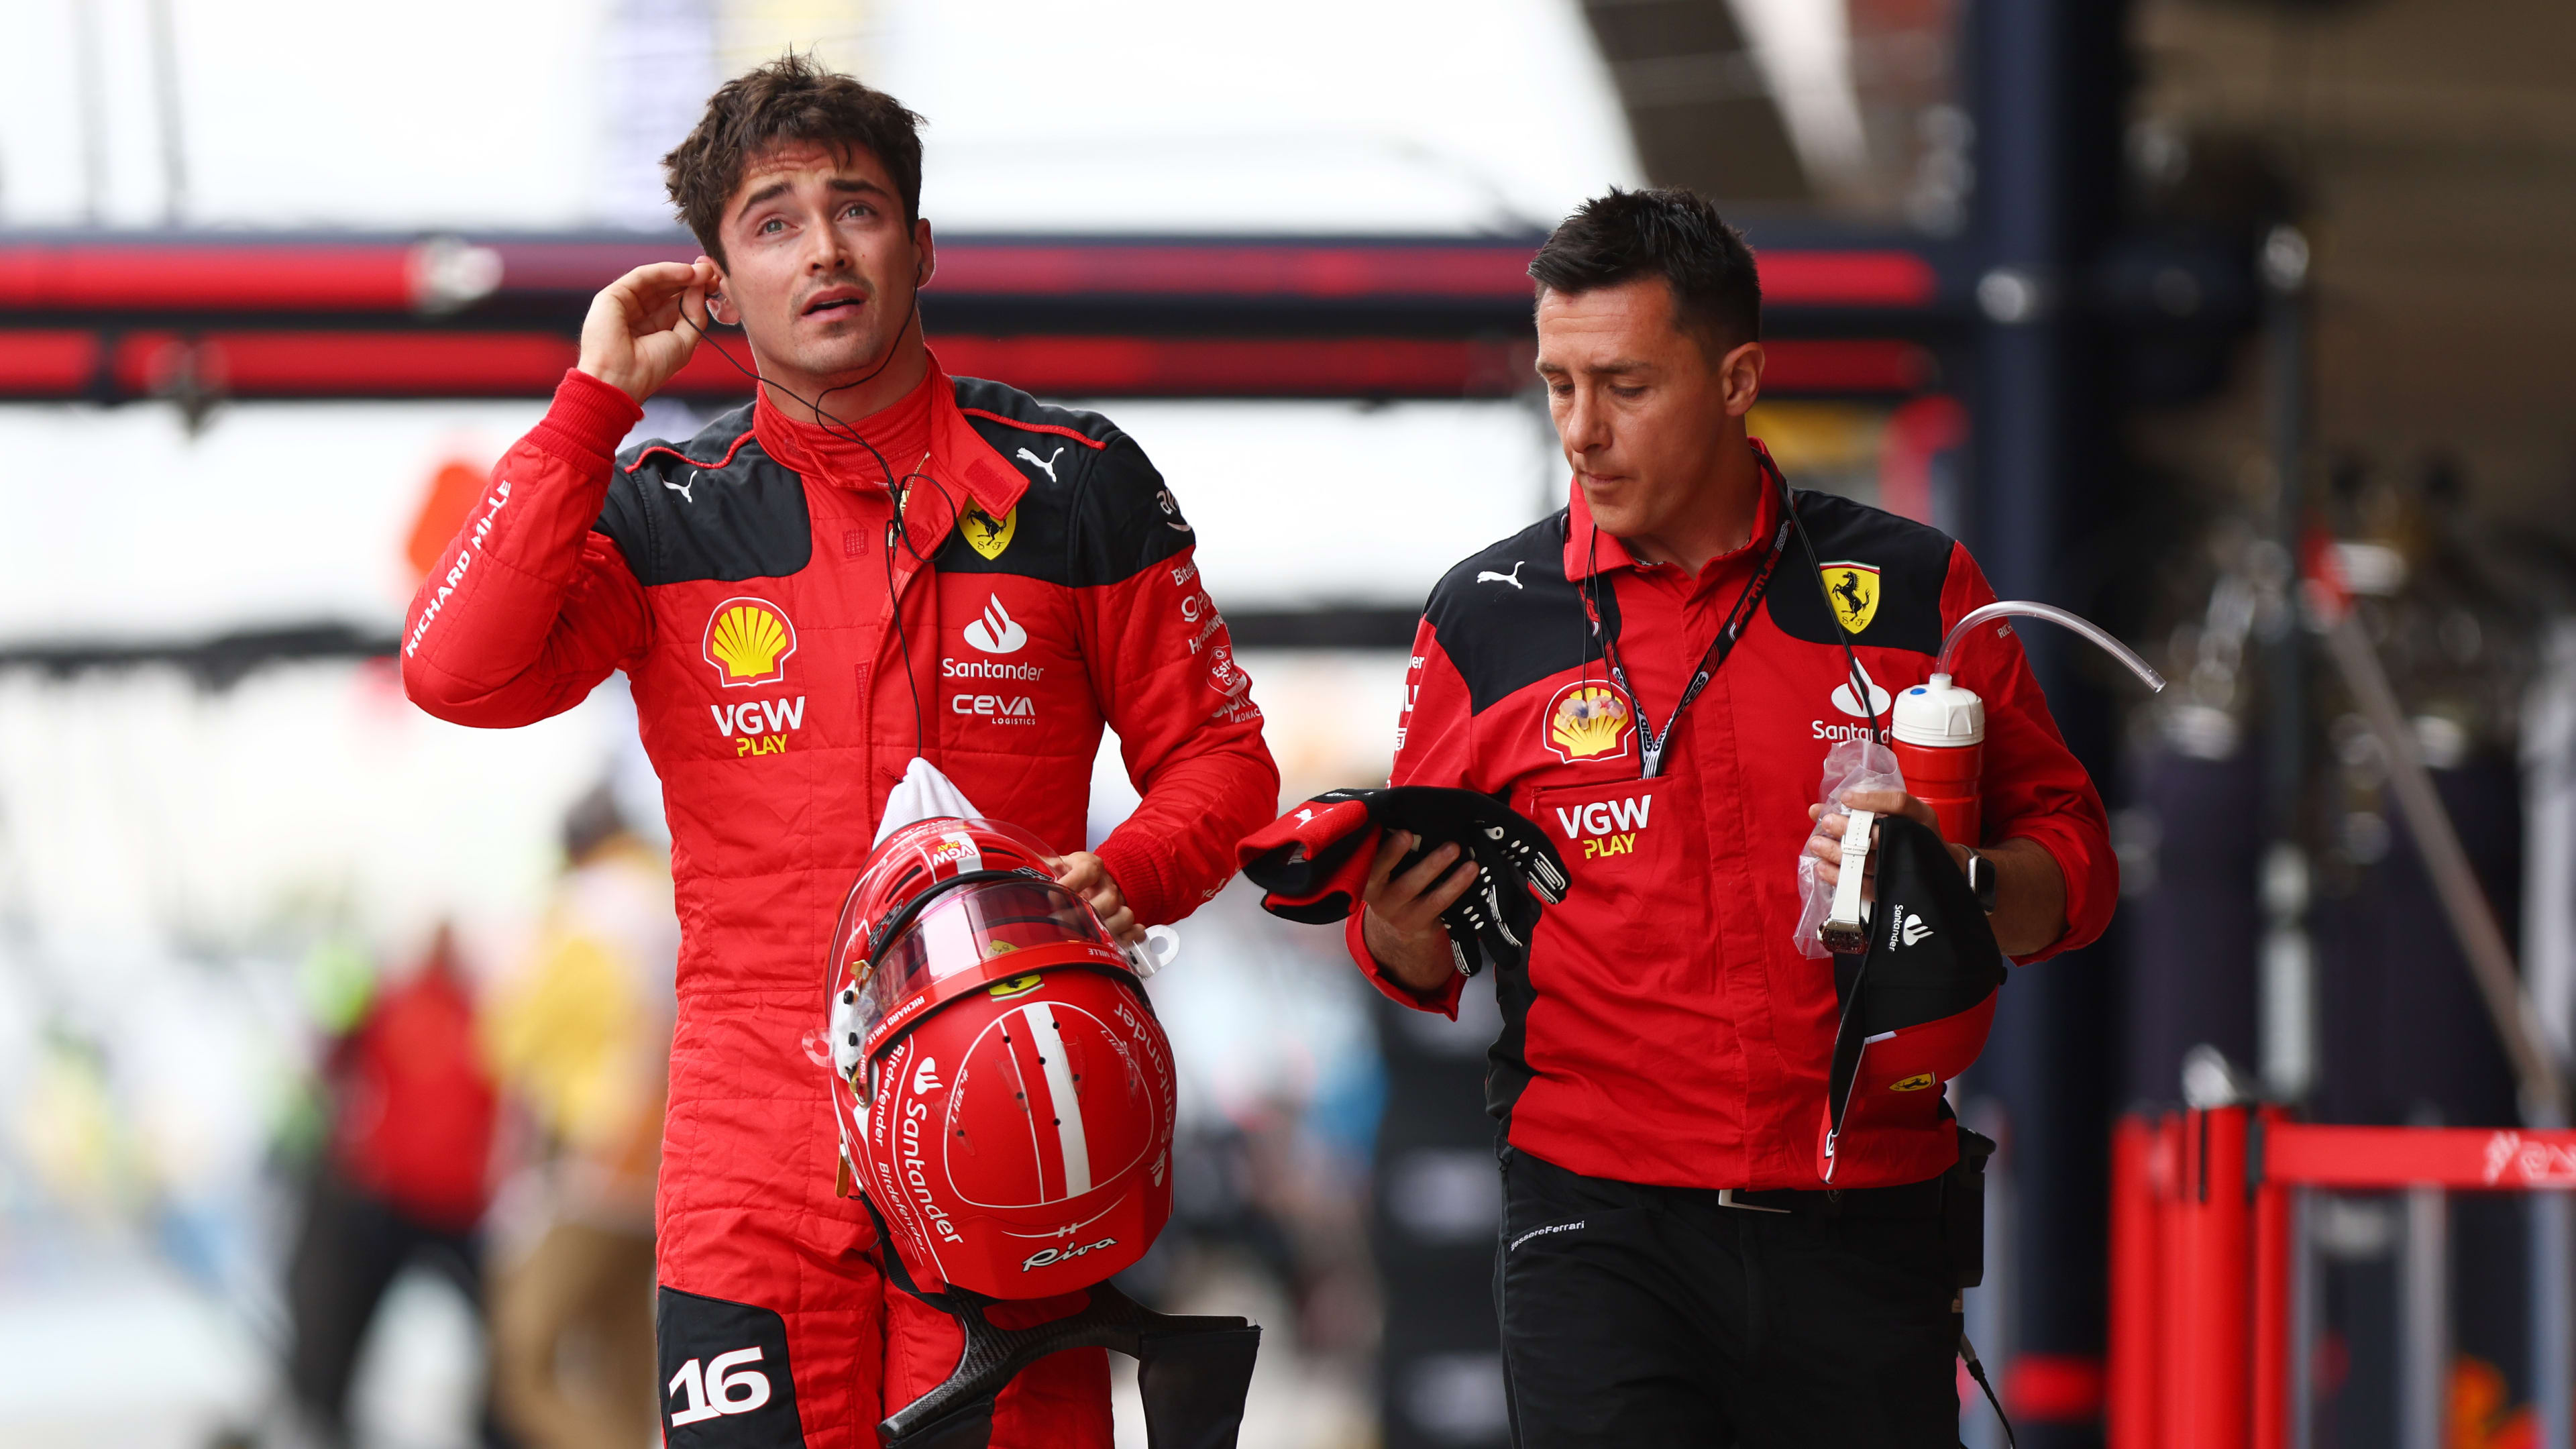 BARCELONA, SPAIN - JUNE 03: 19th Placed qualifier Charles Leclerc of Monaco and Ferrari walks in